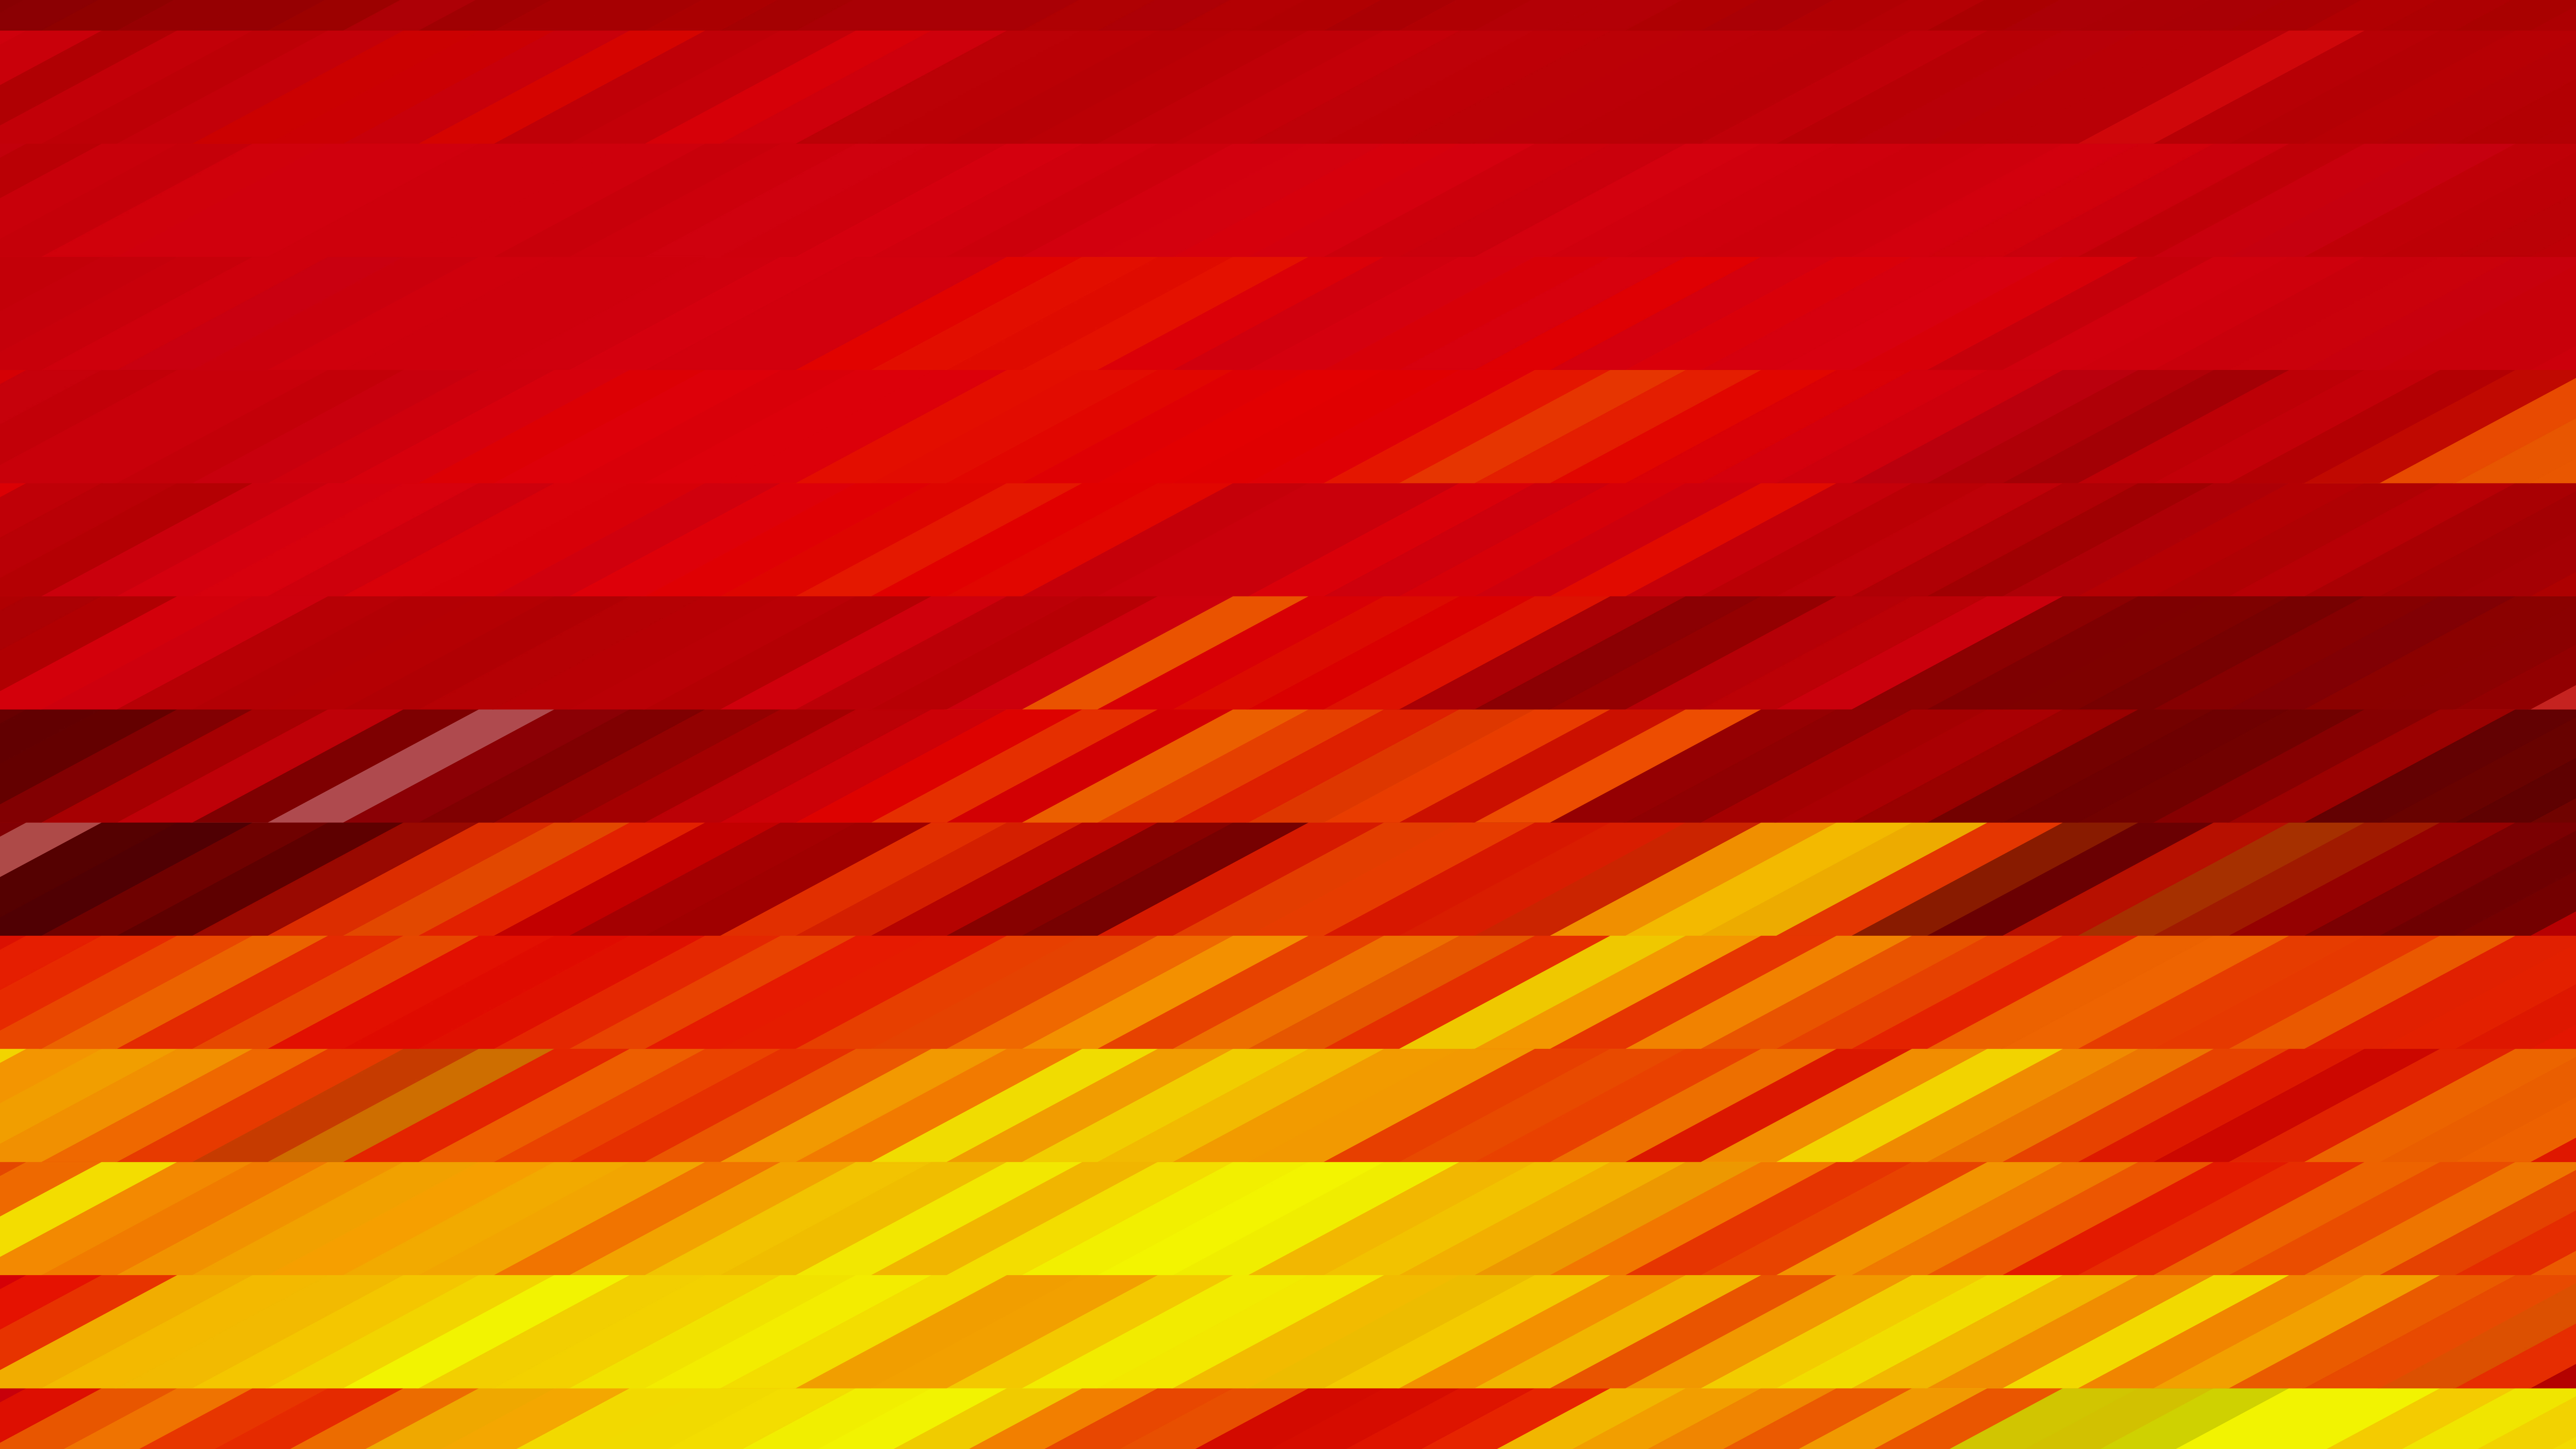 Free Abstract Red and Yellow Geometric Shapes Background Vector